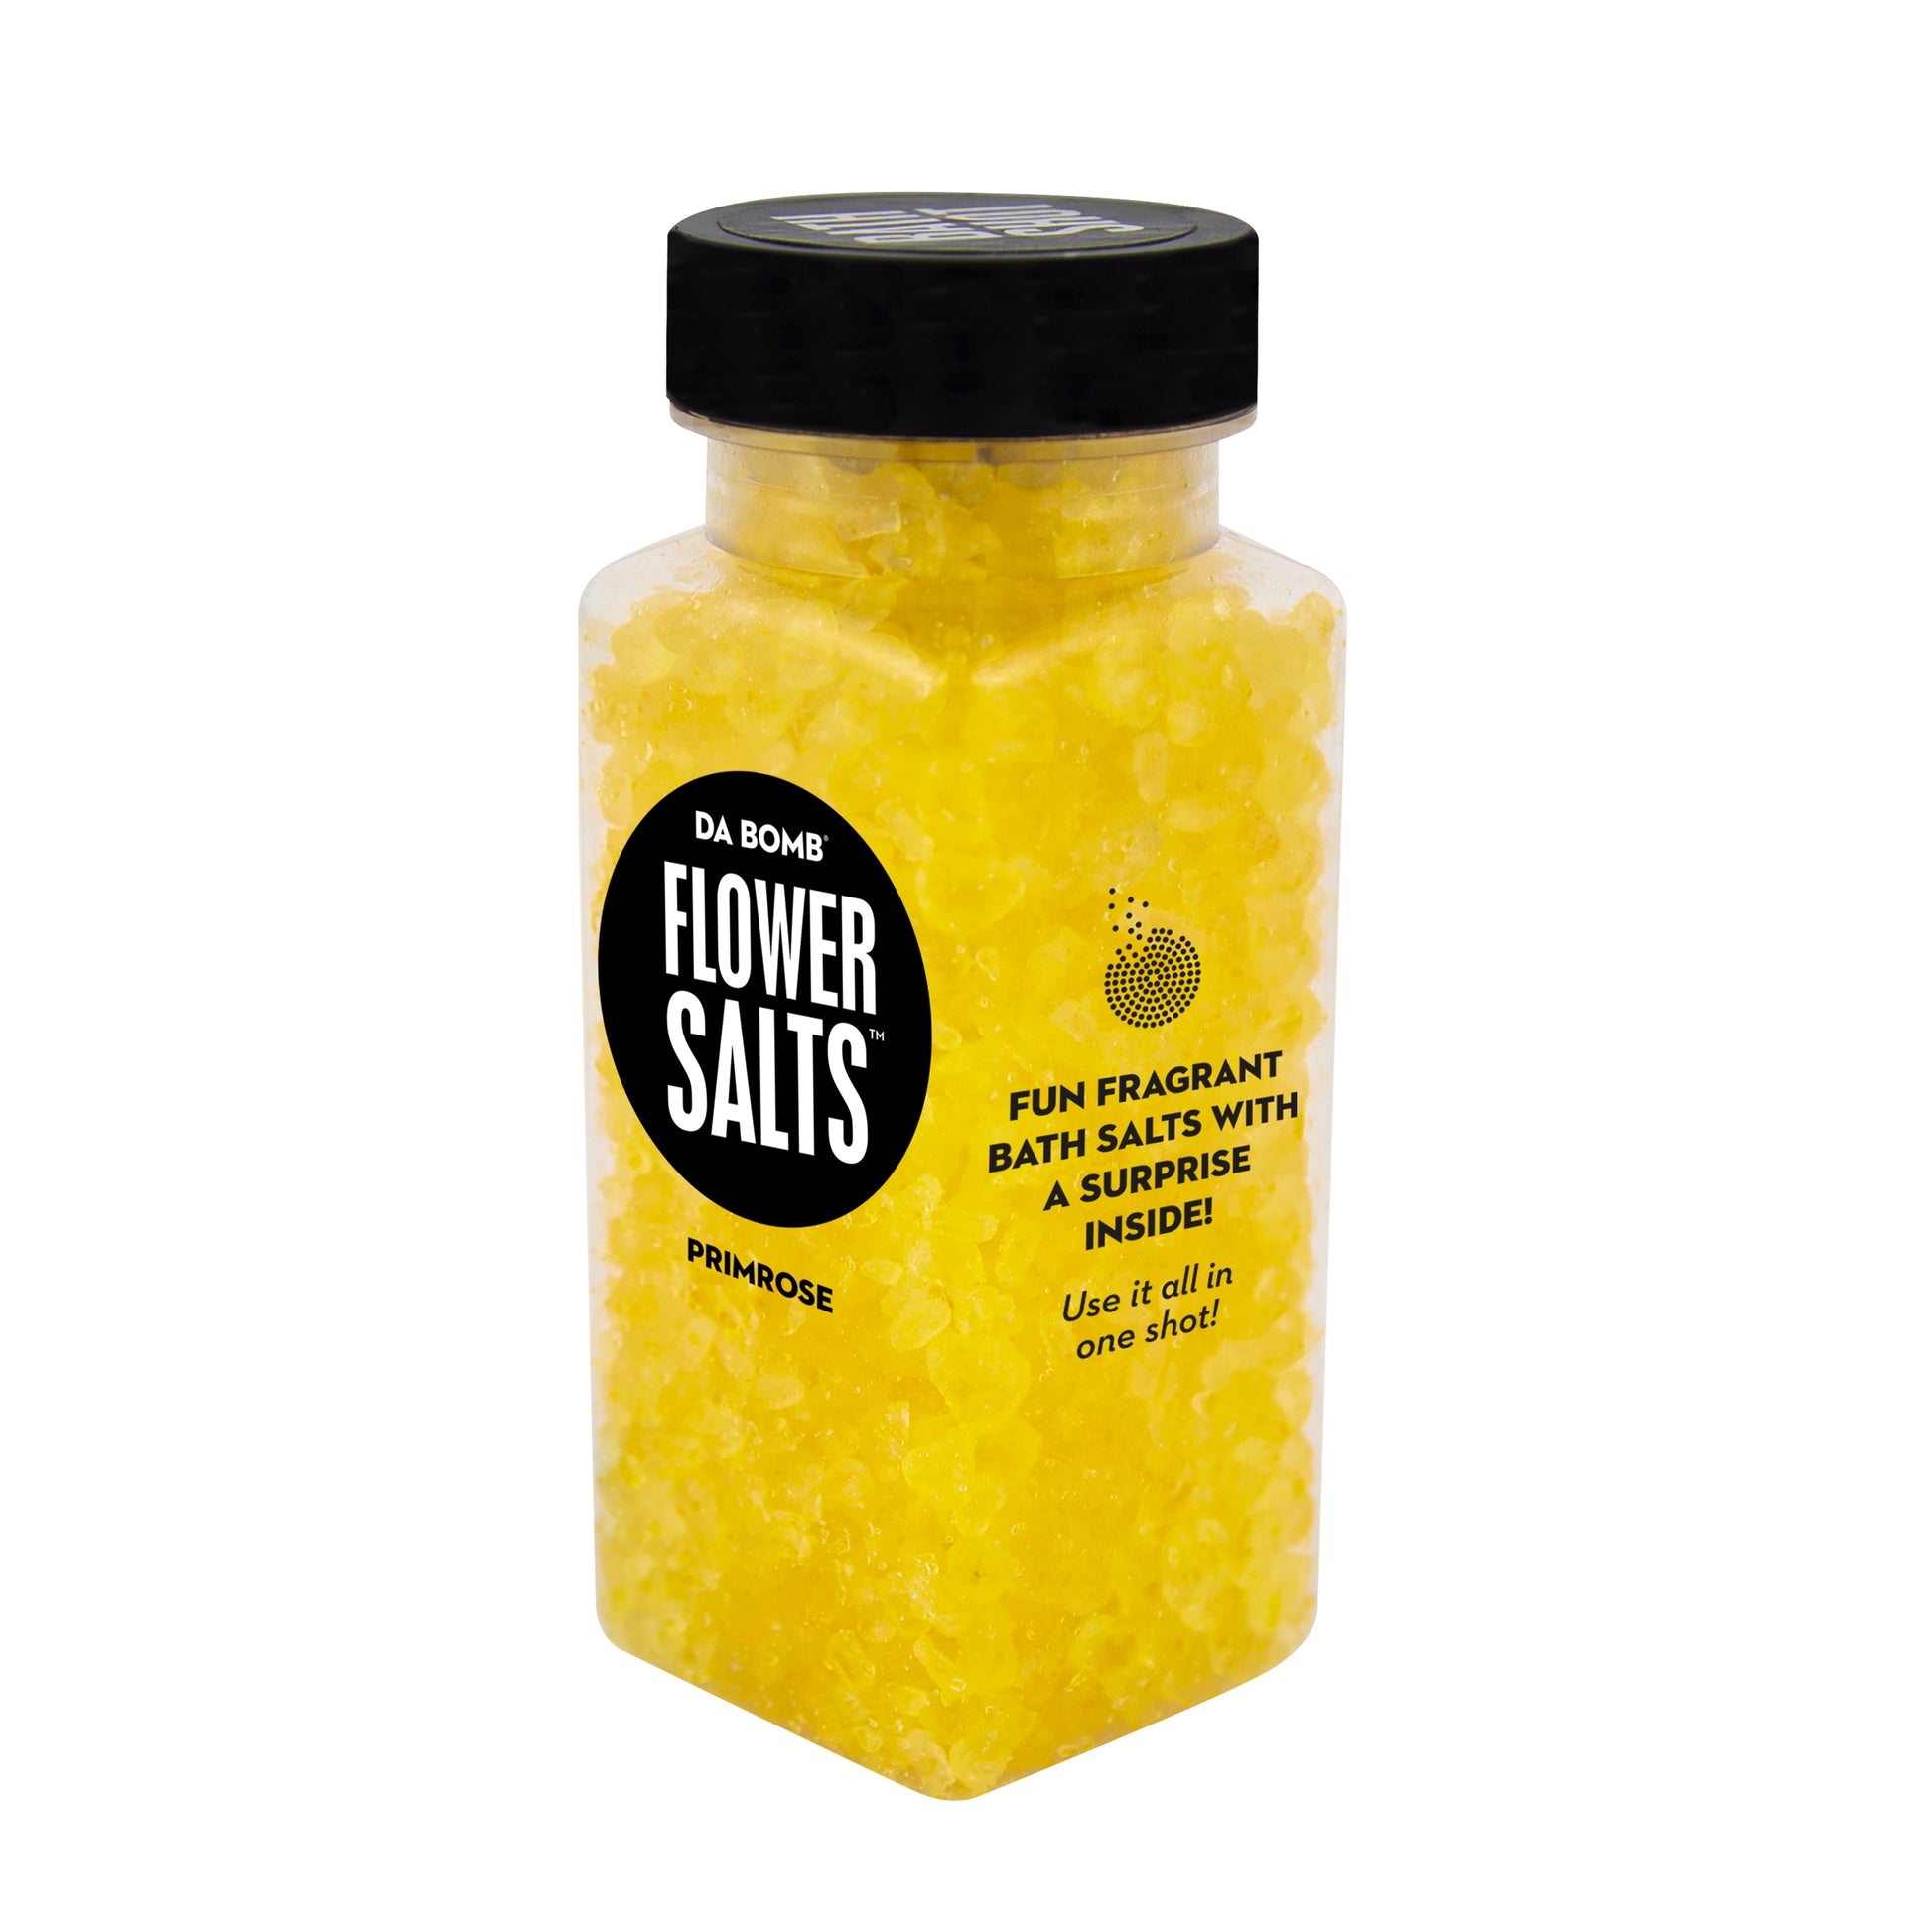 Small, clear plastic jar filled with orange and yellow bath salt that smells like primrose. Each shot contains a fun surprise.